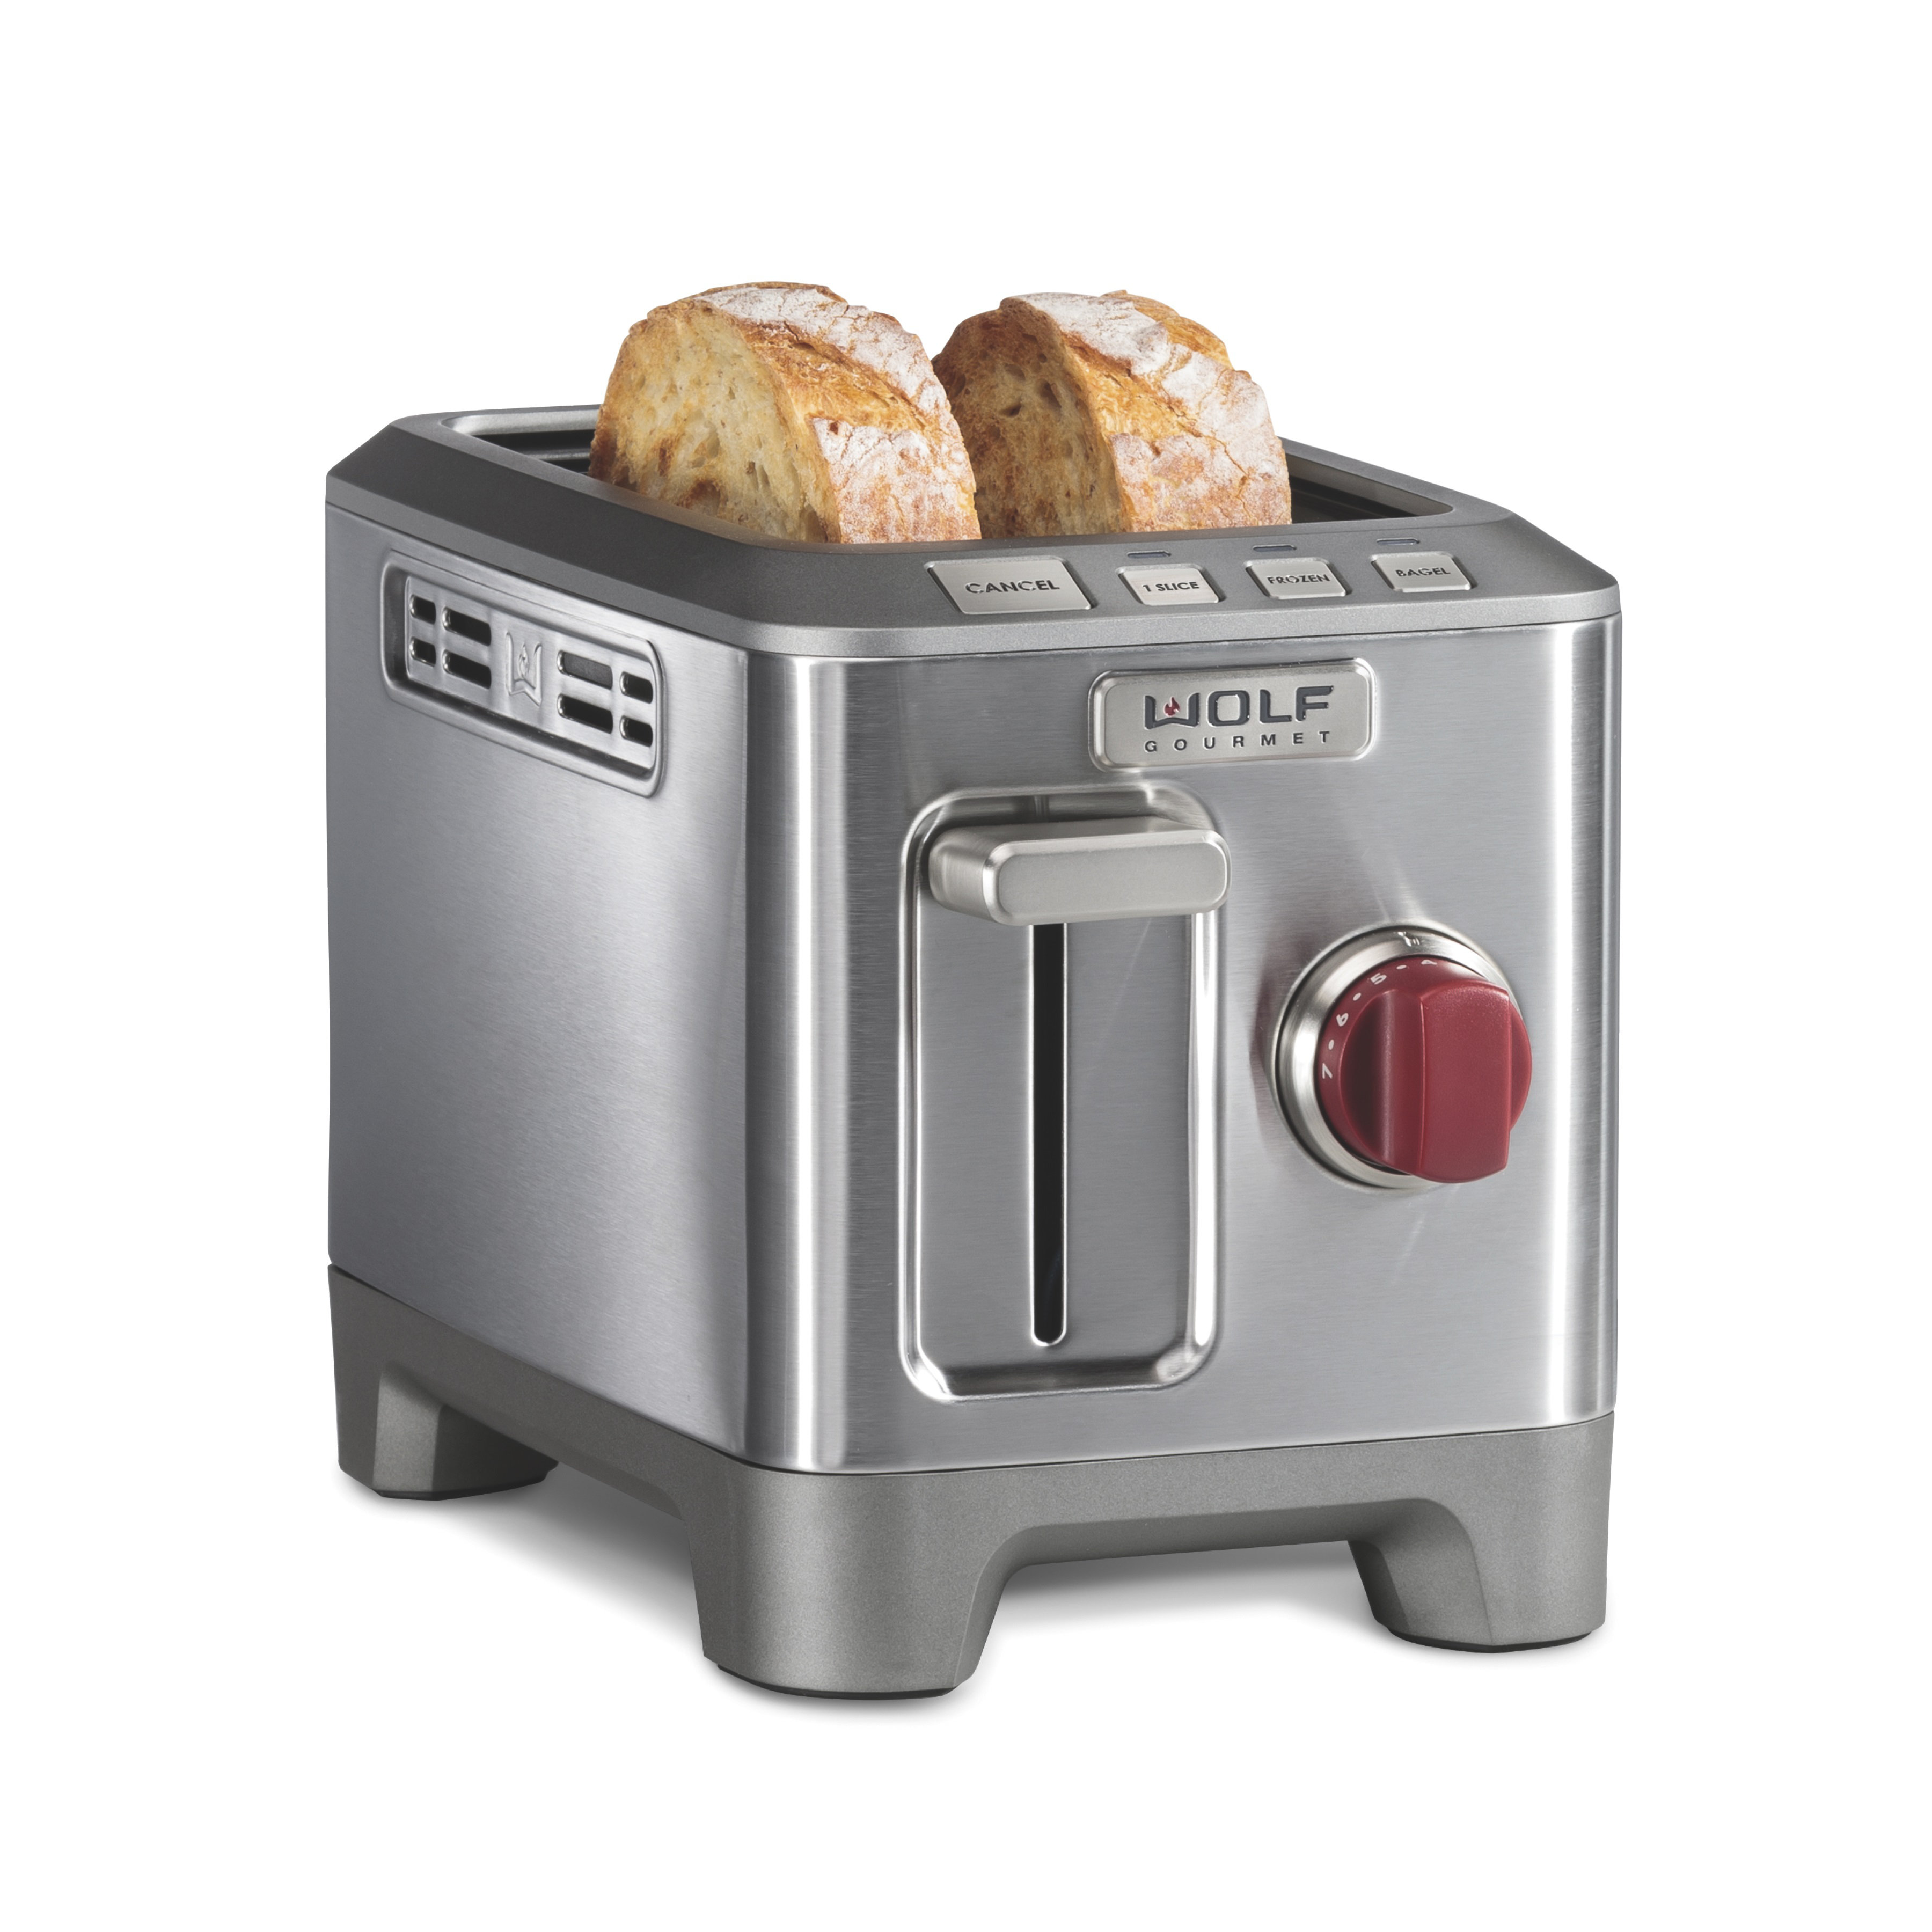  GE Stainless Steel Toaster, 2 Slice, Extra Wide Slots for  Toasting Bagels, Breads, Waffles & More, 7 Shade Options for the Entire  Household to Enjoy